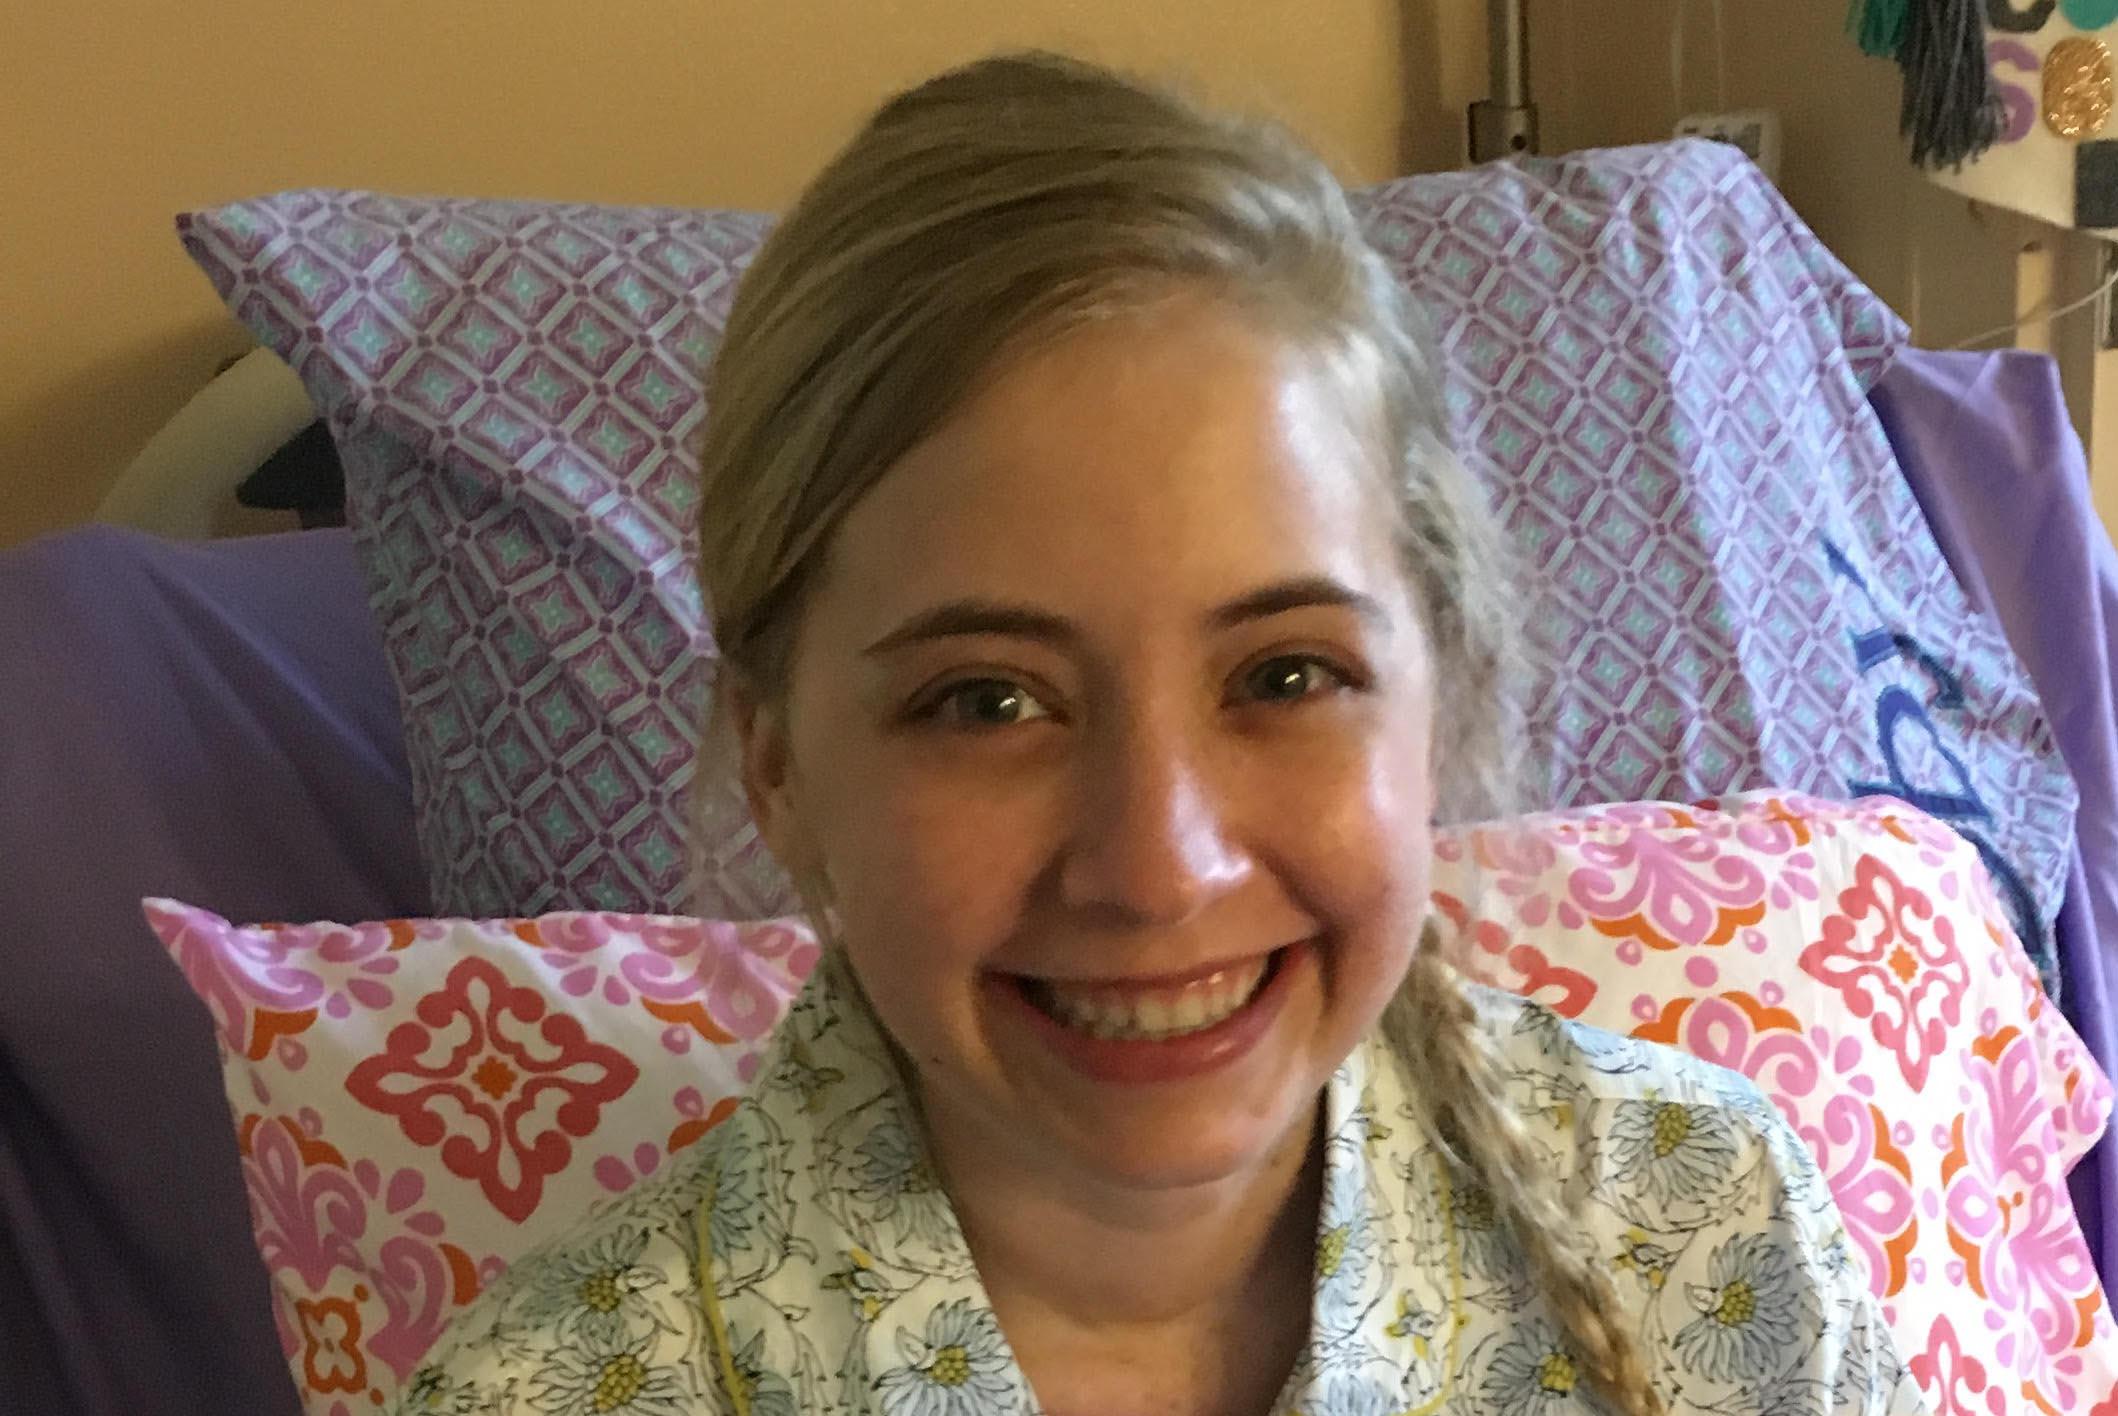 So sad!Nealy one year after lung transplant,23-year-old UWA student dies